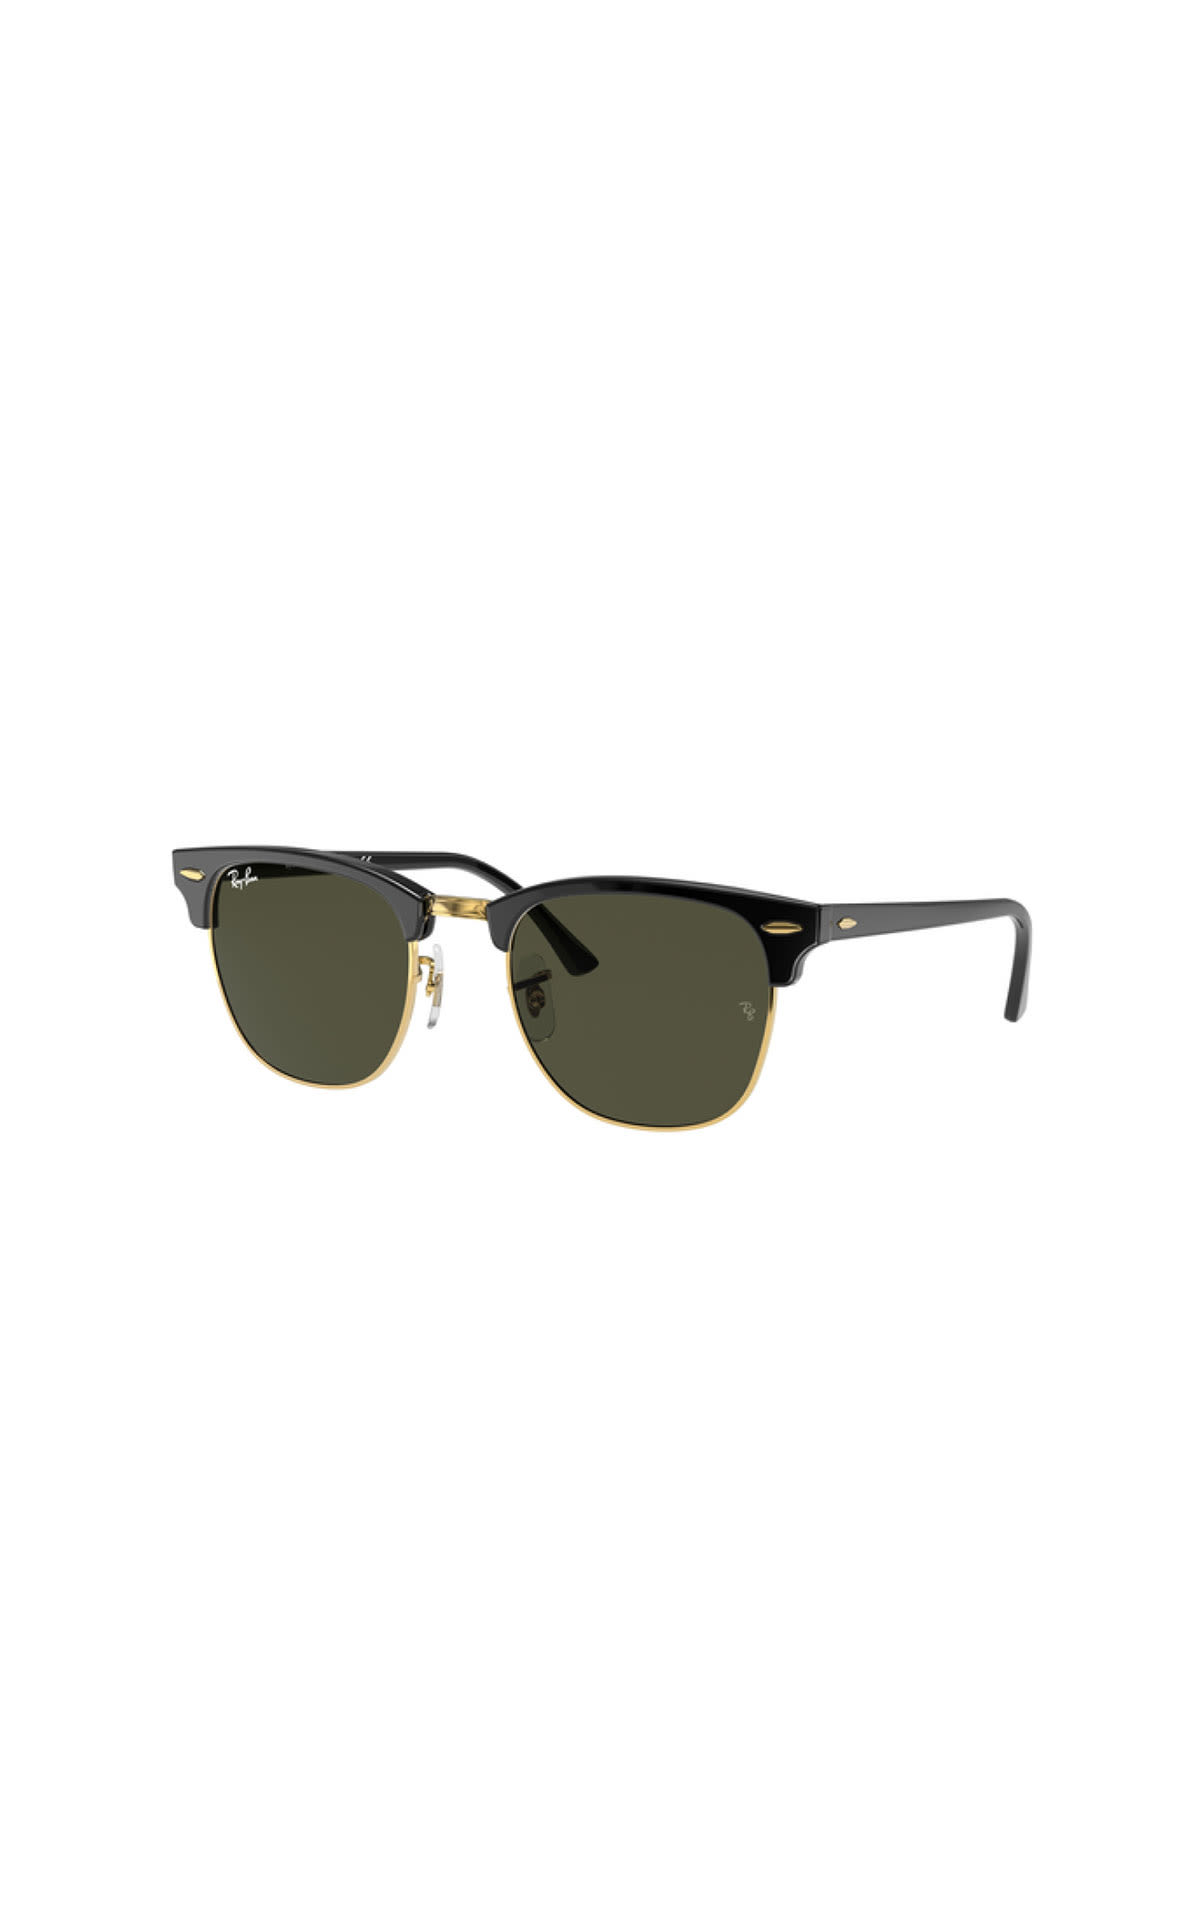 David Clulow Ray-Ban RB3016 51 clubmaster from Bicester Village